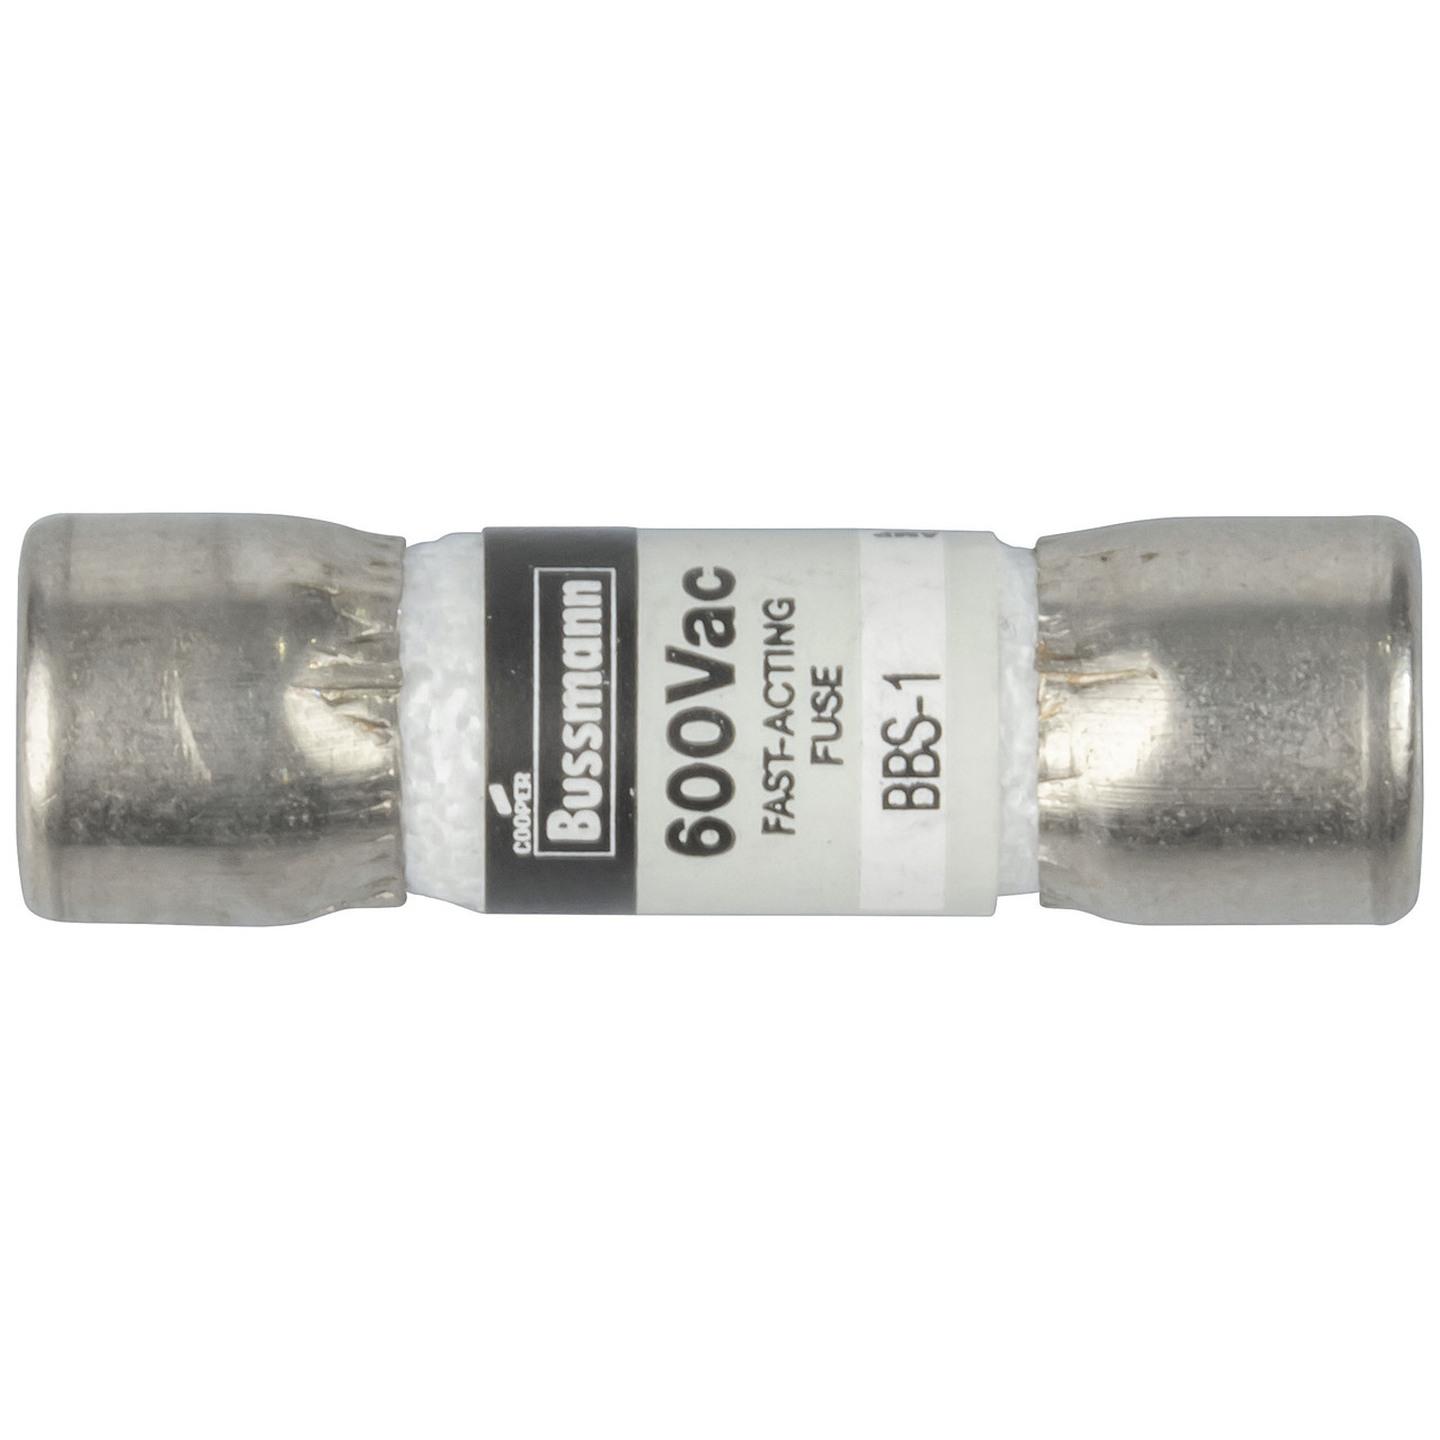 Fast Acting Cartridge Fuses - For use in Multimeters - 1A 600V